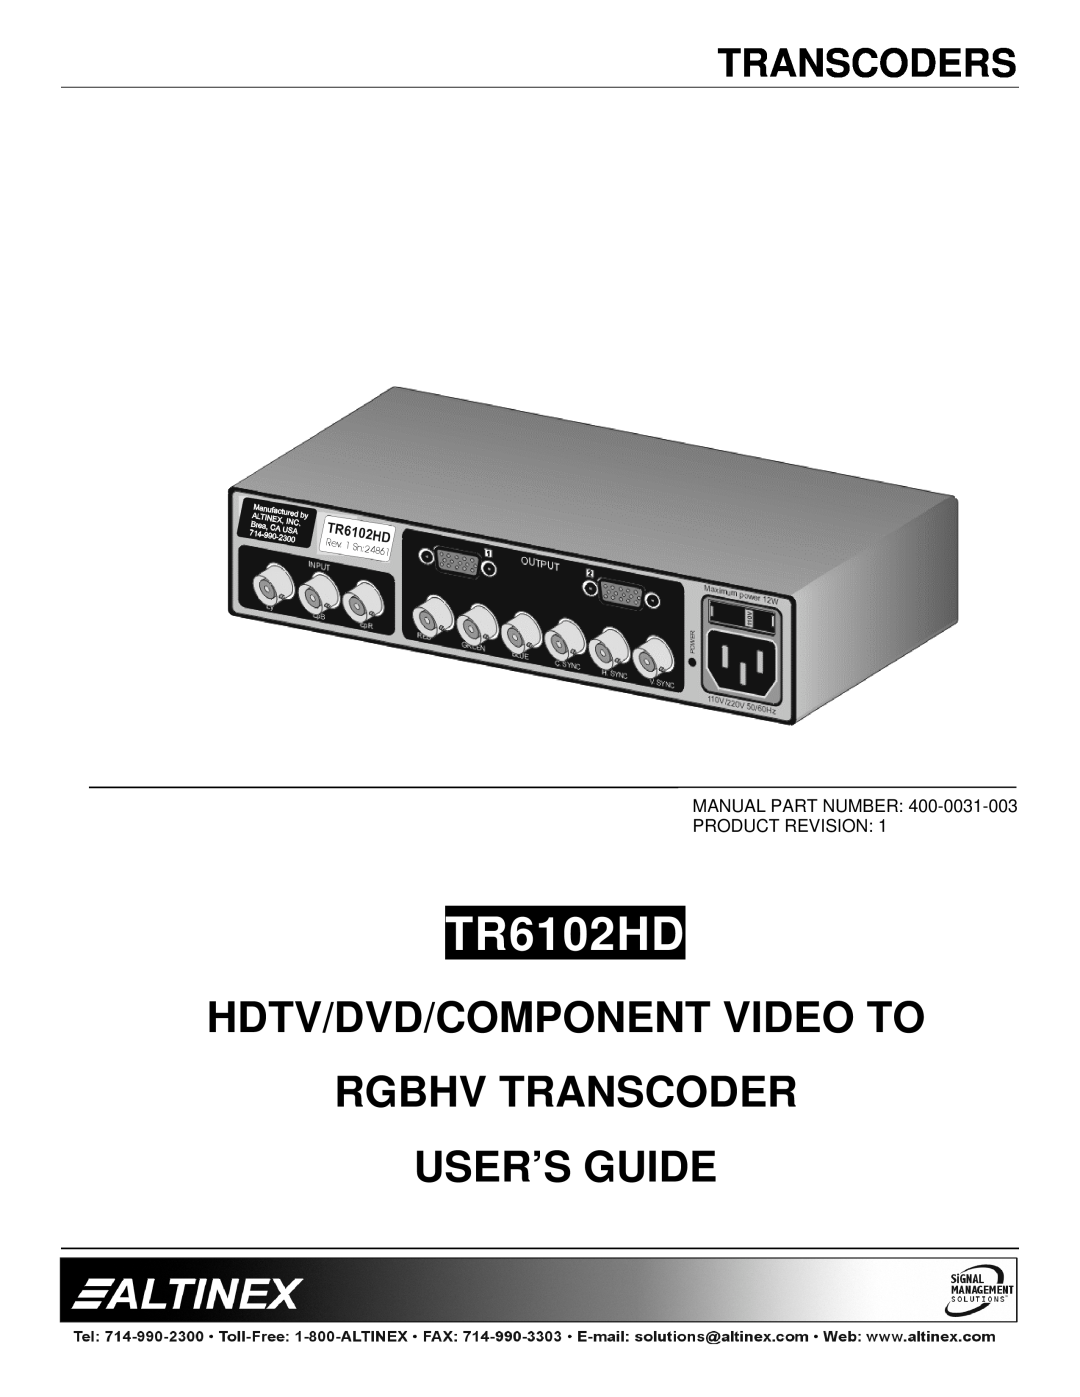 Altinex TR6102HD manual Transcoders, Hdtv/Dvd/Component Video To Rgbhv Transcoder, User’S Guide 